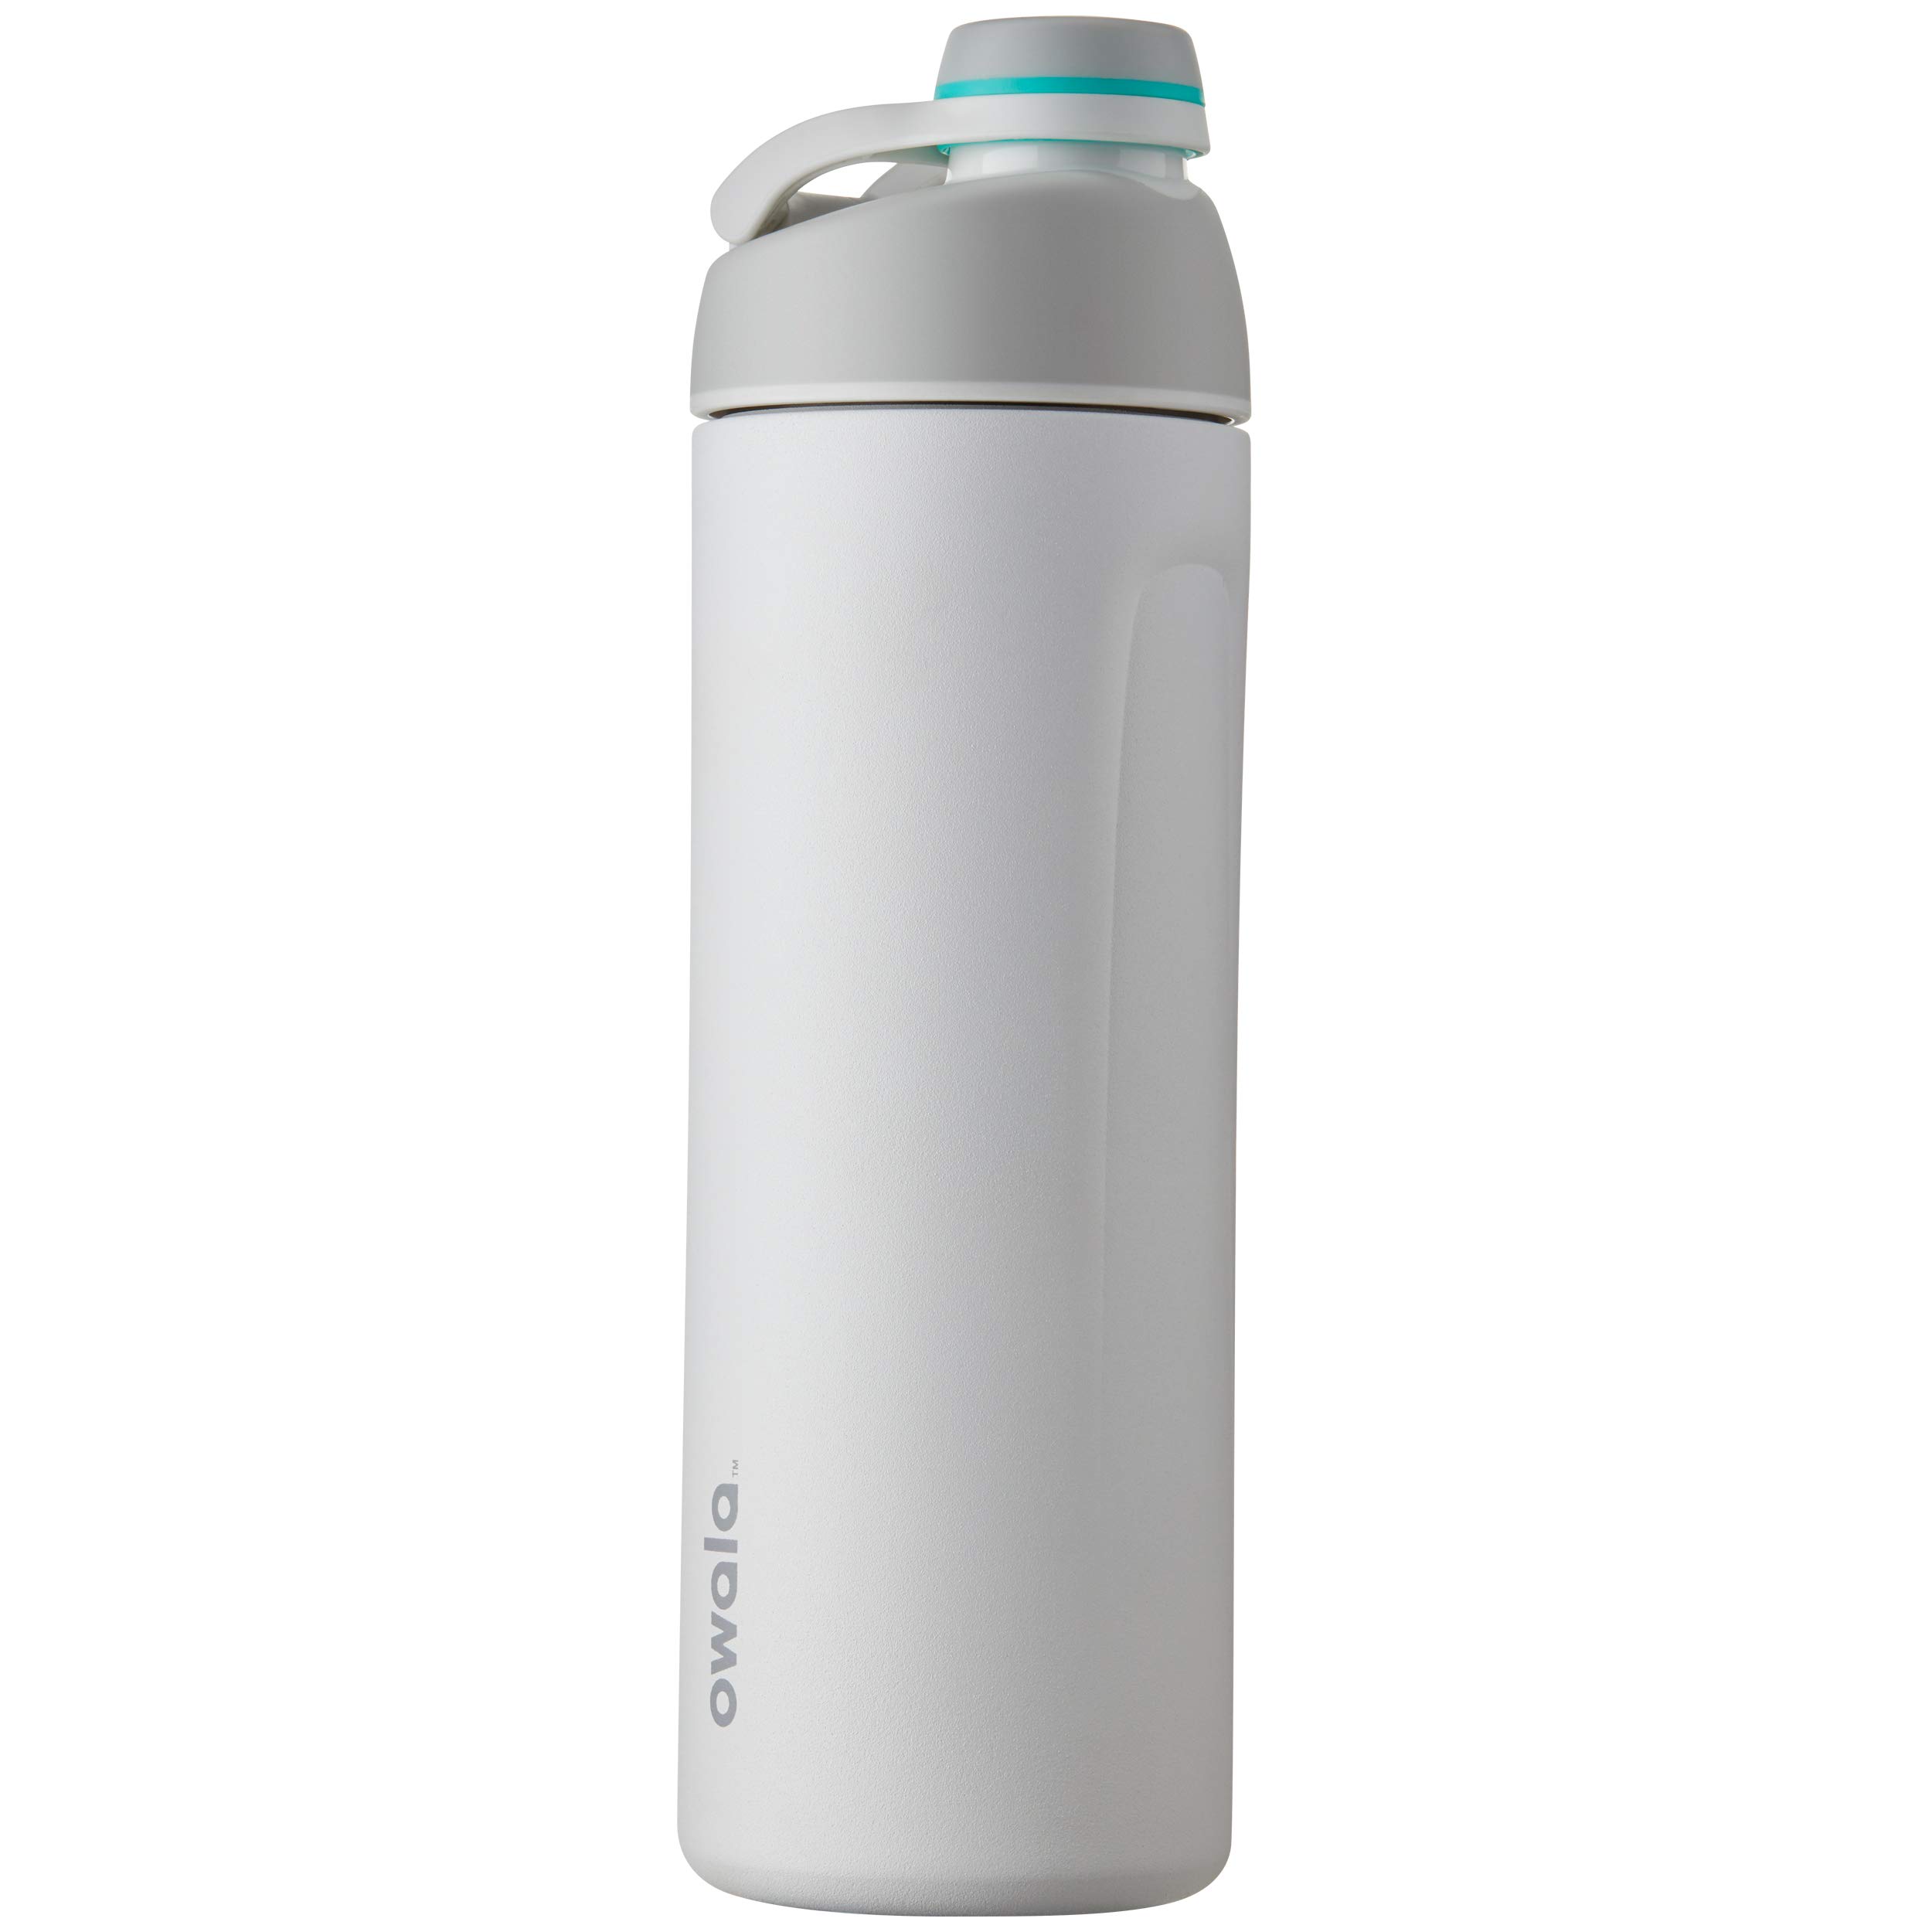 Owala FreeSip Insulated Stainless Steel Water Bottle with Straw for Sports  and Travel, BPA-Free, 24-…See more Owala FreeSip Insulated Stainless Steel